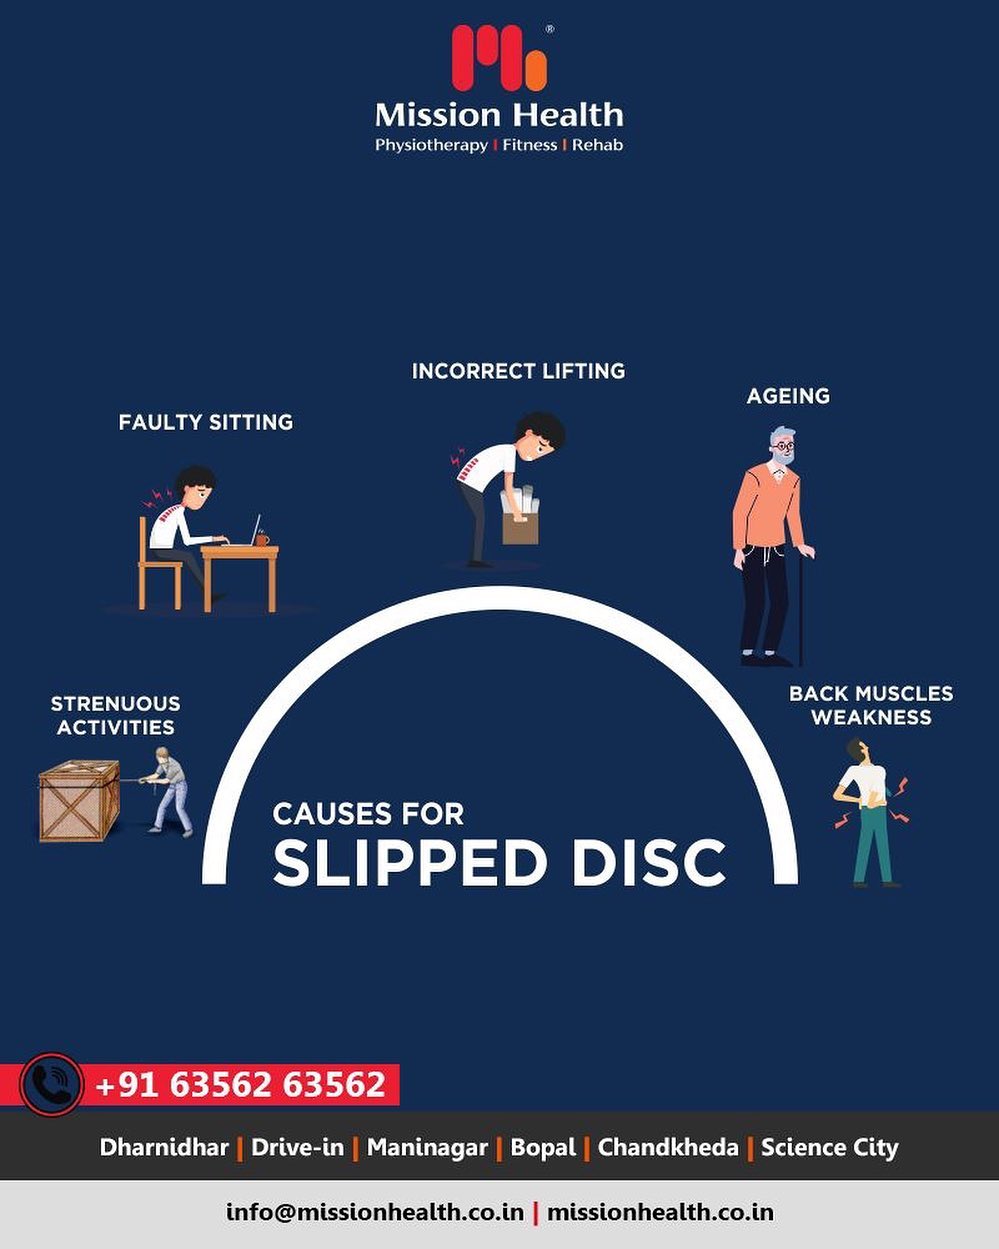 Slipped Disc is one of the most common causes of Neck and Back Pain, mostly caused due to lifestyle challenges. We at Mission Health Super Specialty Spine Clinic, have treated more than 30000 Neck Pain and Back Pain from different parts of the world

#slippeddisc #slippeddisctreatmentahmedabad #slippeddisctreatmentgujarat #slippeddisctreatmentindia #slippeddisctreatasia #no1sleepdiscedtreatmentindia #superspecialityclinicsforslippeddisc #painmanagementindia #painmanagementasia #painmanagementafrica #internationaltourism #MissionHealth #MissionHealthIndia #MovementIsLife #AbilityClinic